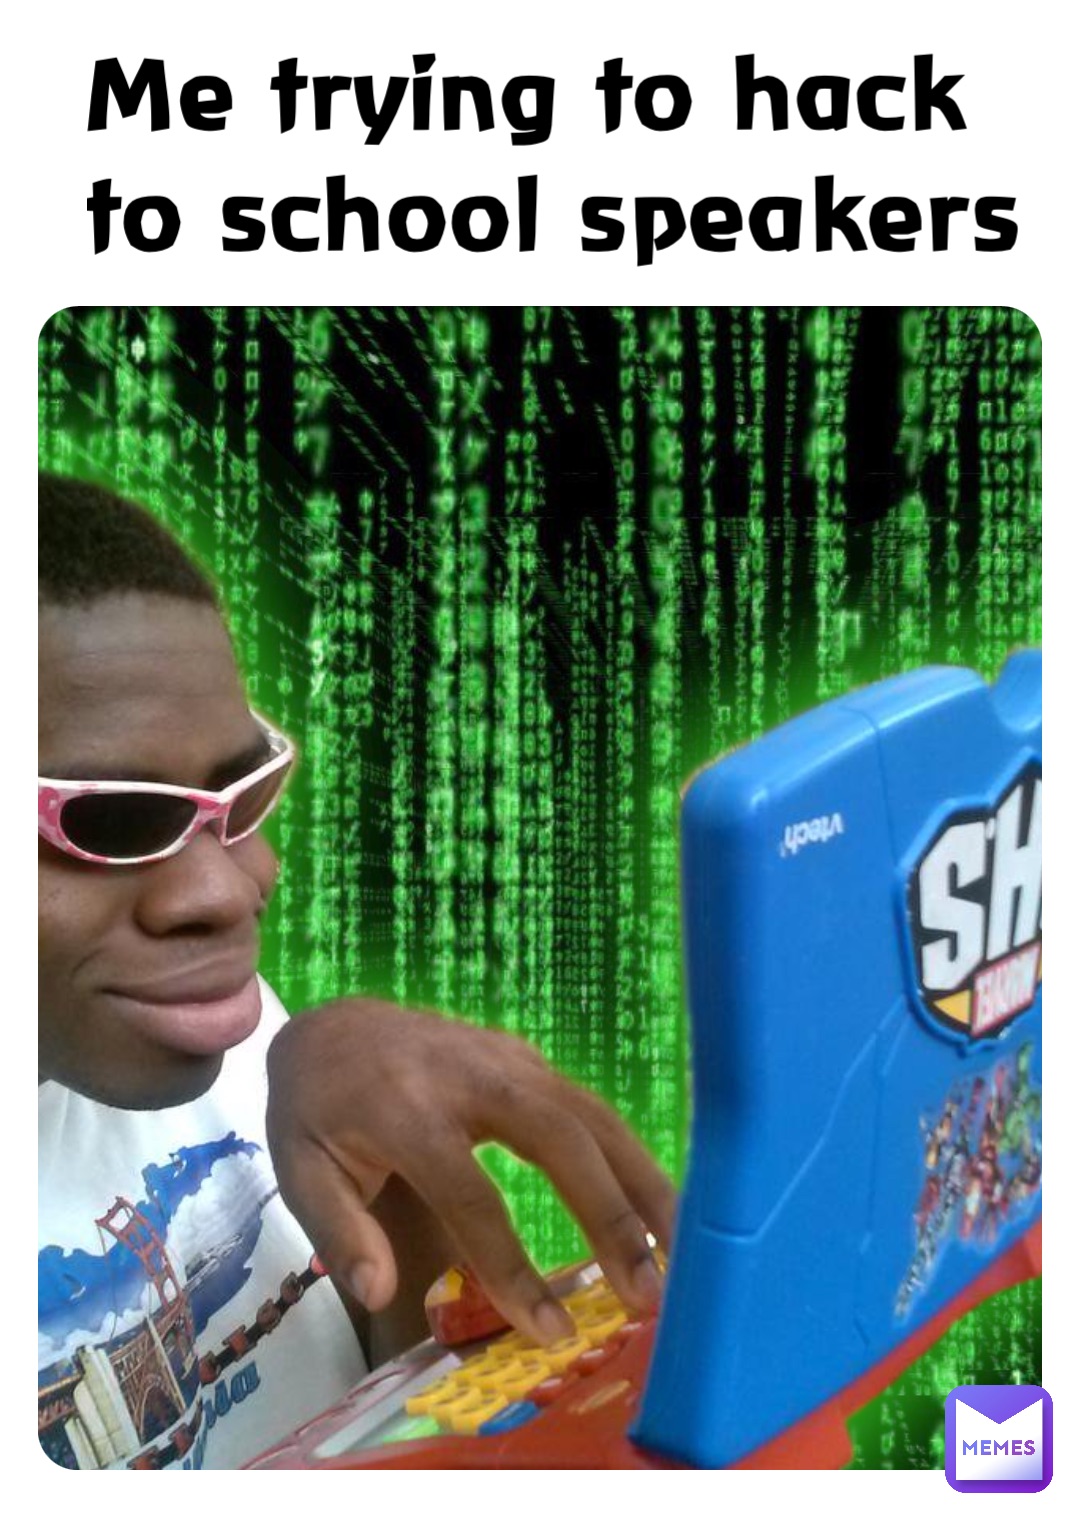 Me trying to hack to school speakers